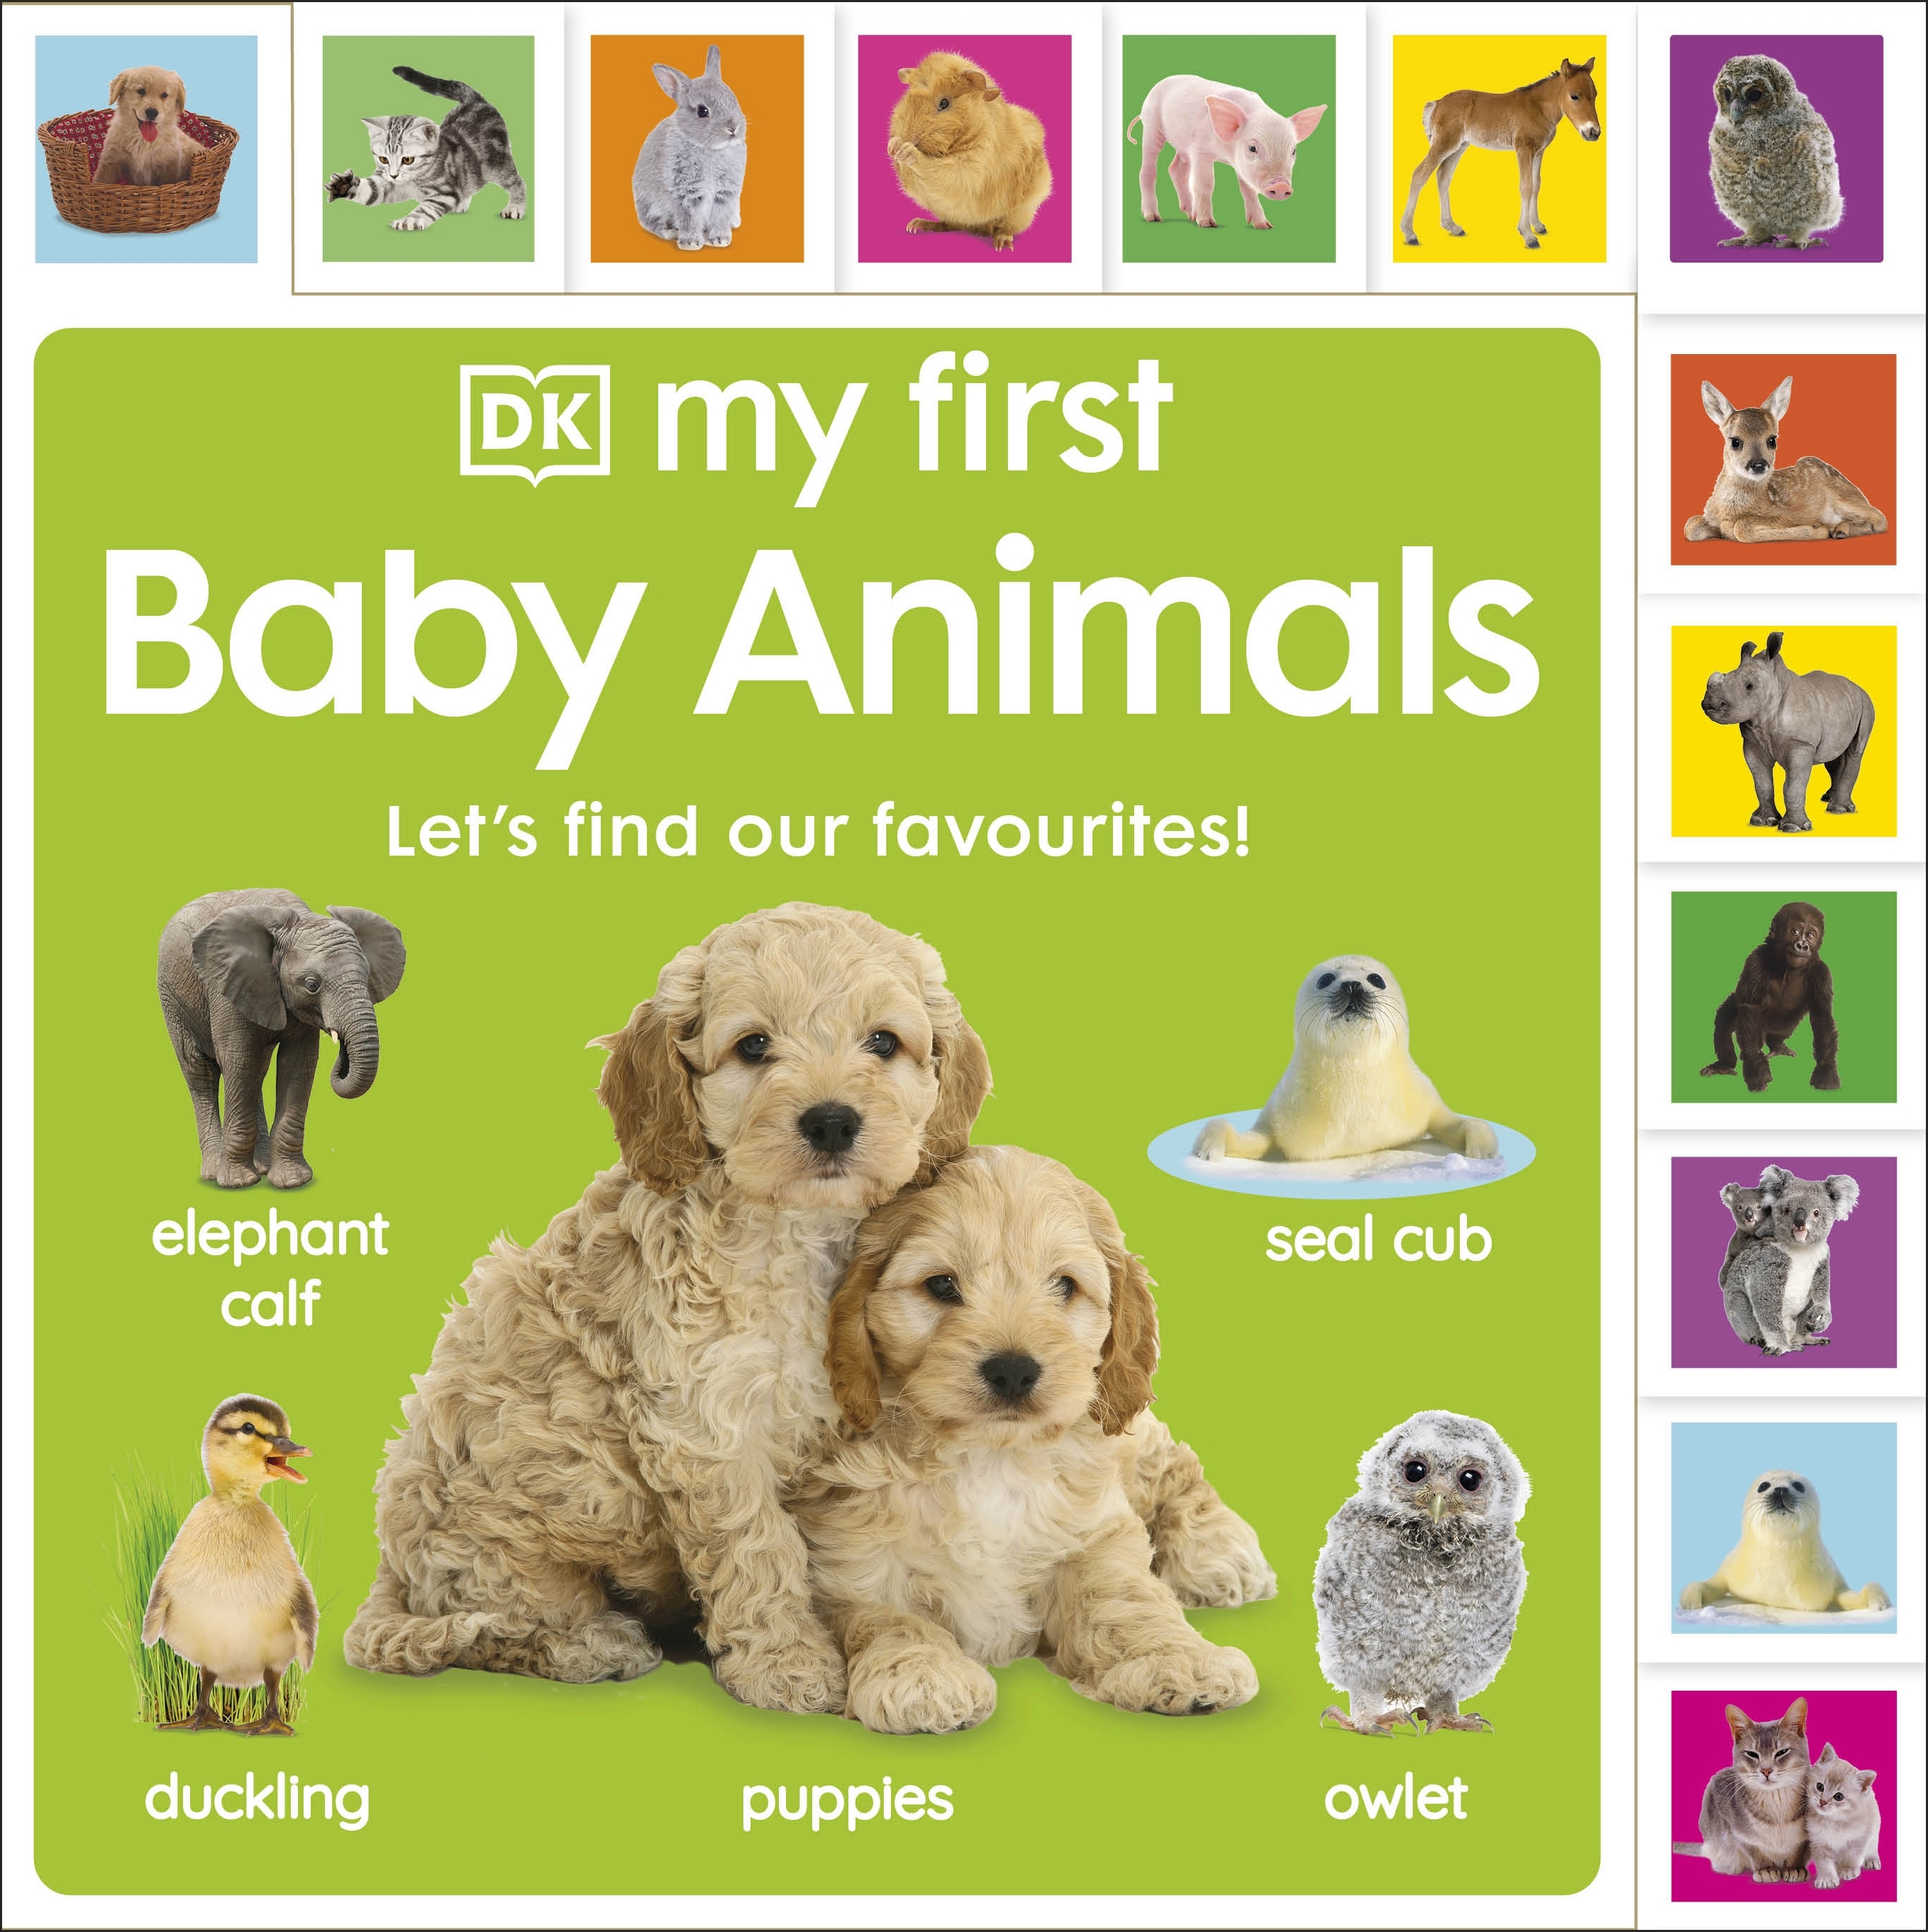 My First Baby Animals Let's Find our Favourites! by DK - Penguin Books  Australia